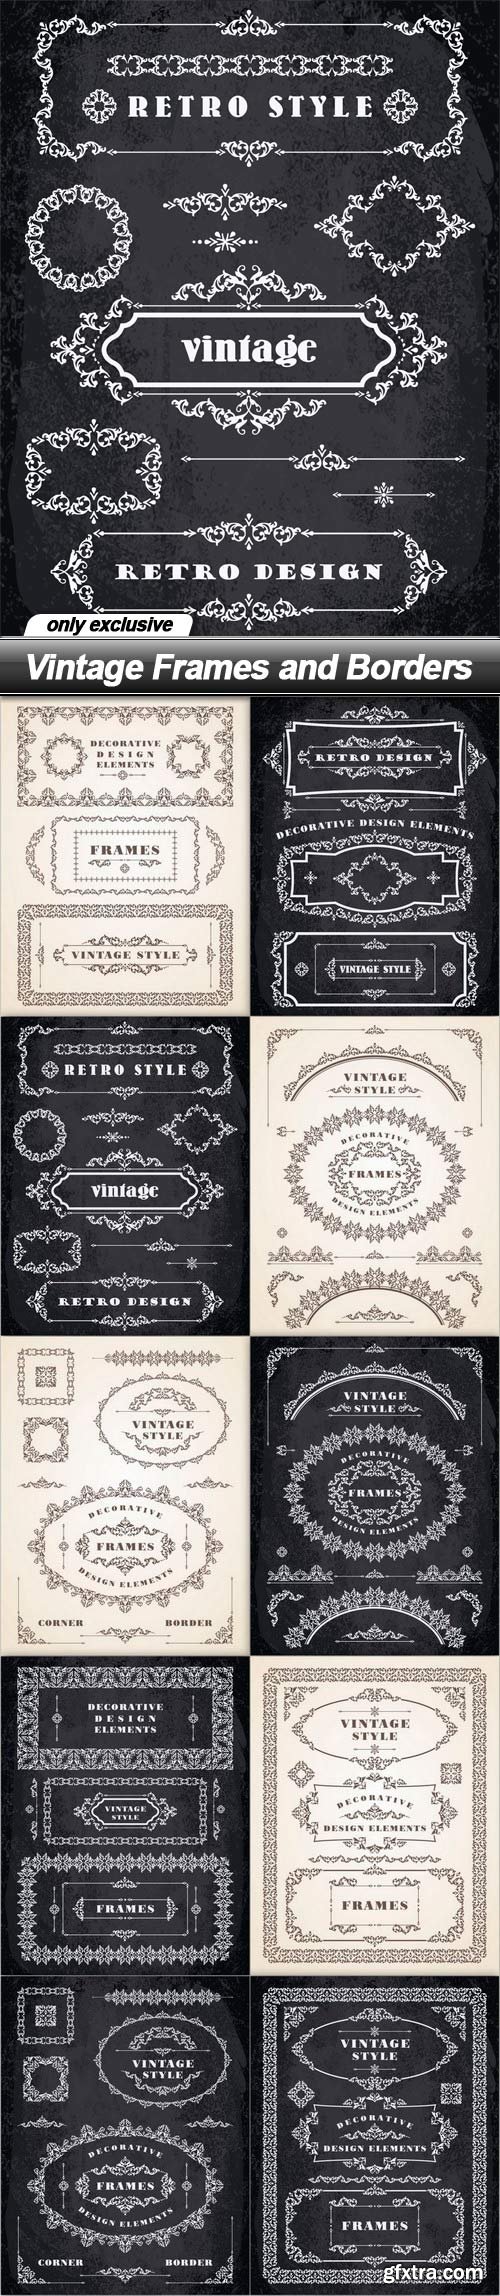 Vintage Frames and Borders - 10 EPS